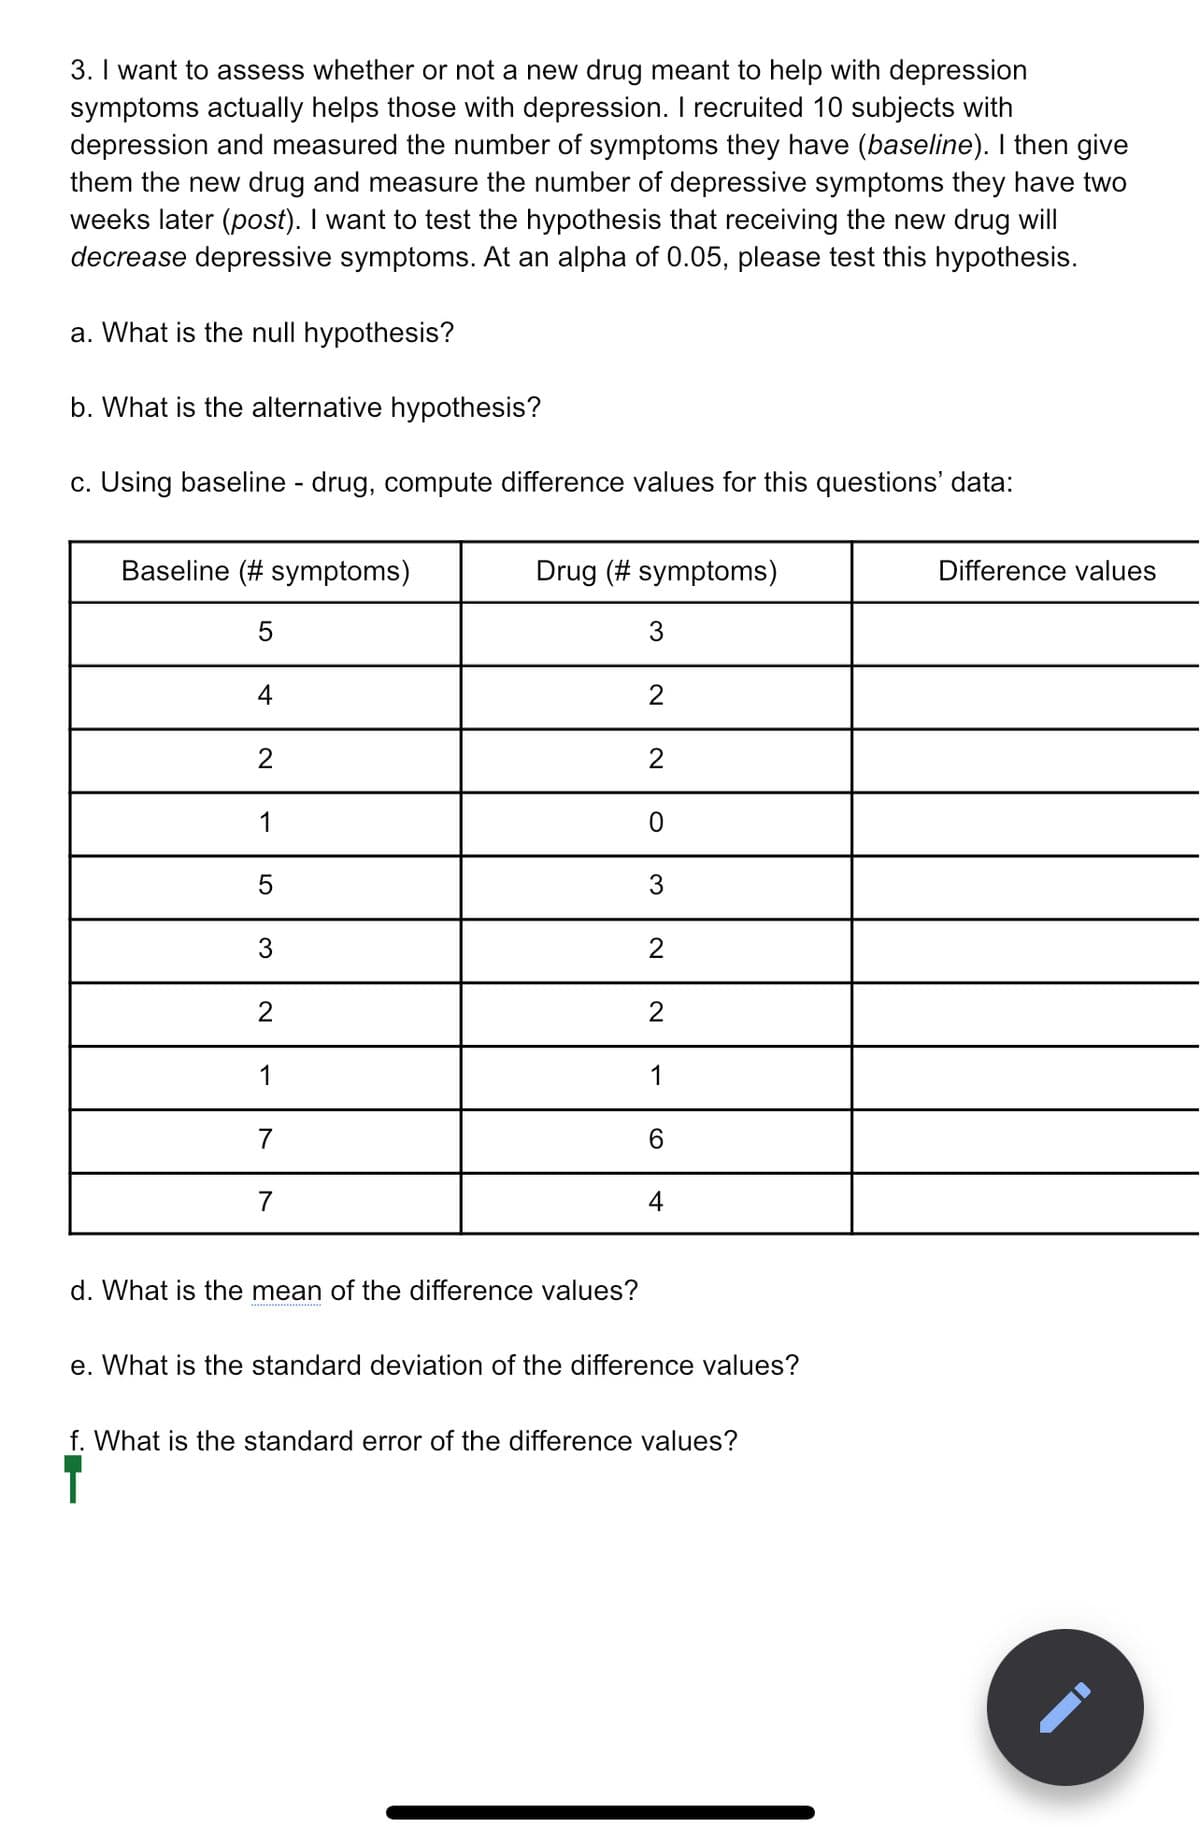 3. I want to assess whether or not a new drug meant to help with depression
symptoms actually helps those with depression. I recruited 10 subjects with
depression and measured the number of symptoms they have (baseline). I then give
them the new drug and measure the number of depressive symptoms they have two
weeks later (post). I want to test the hypothesis that receiving the new drug will
decrease depressive symptoms. At an alpha of 0.05, please test this hypothesis.
a. What is the null hypothesis?
b. What is the alternative hypothesis?
c. Using baseline - drug, compute difference values for this questions' data:
Baseline (# symptoms)
Drug (# symptoms)
Difference values
5
3
4
2
1
5
3
3
2
2
2
1
1
7
6
7
4
d. What is the mean of the difference values?
e. What is the standard deviation of the difference values?
f. What is the standard error of the difference values?
